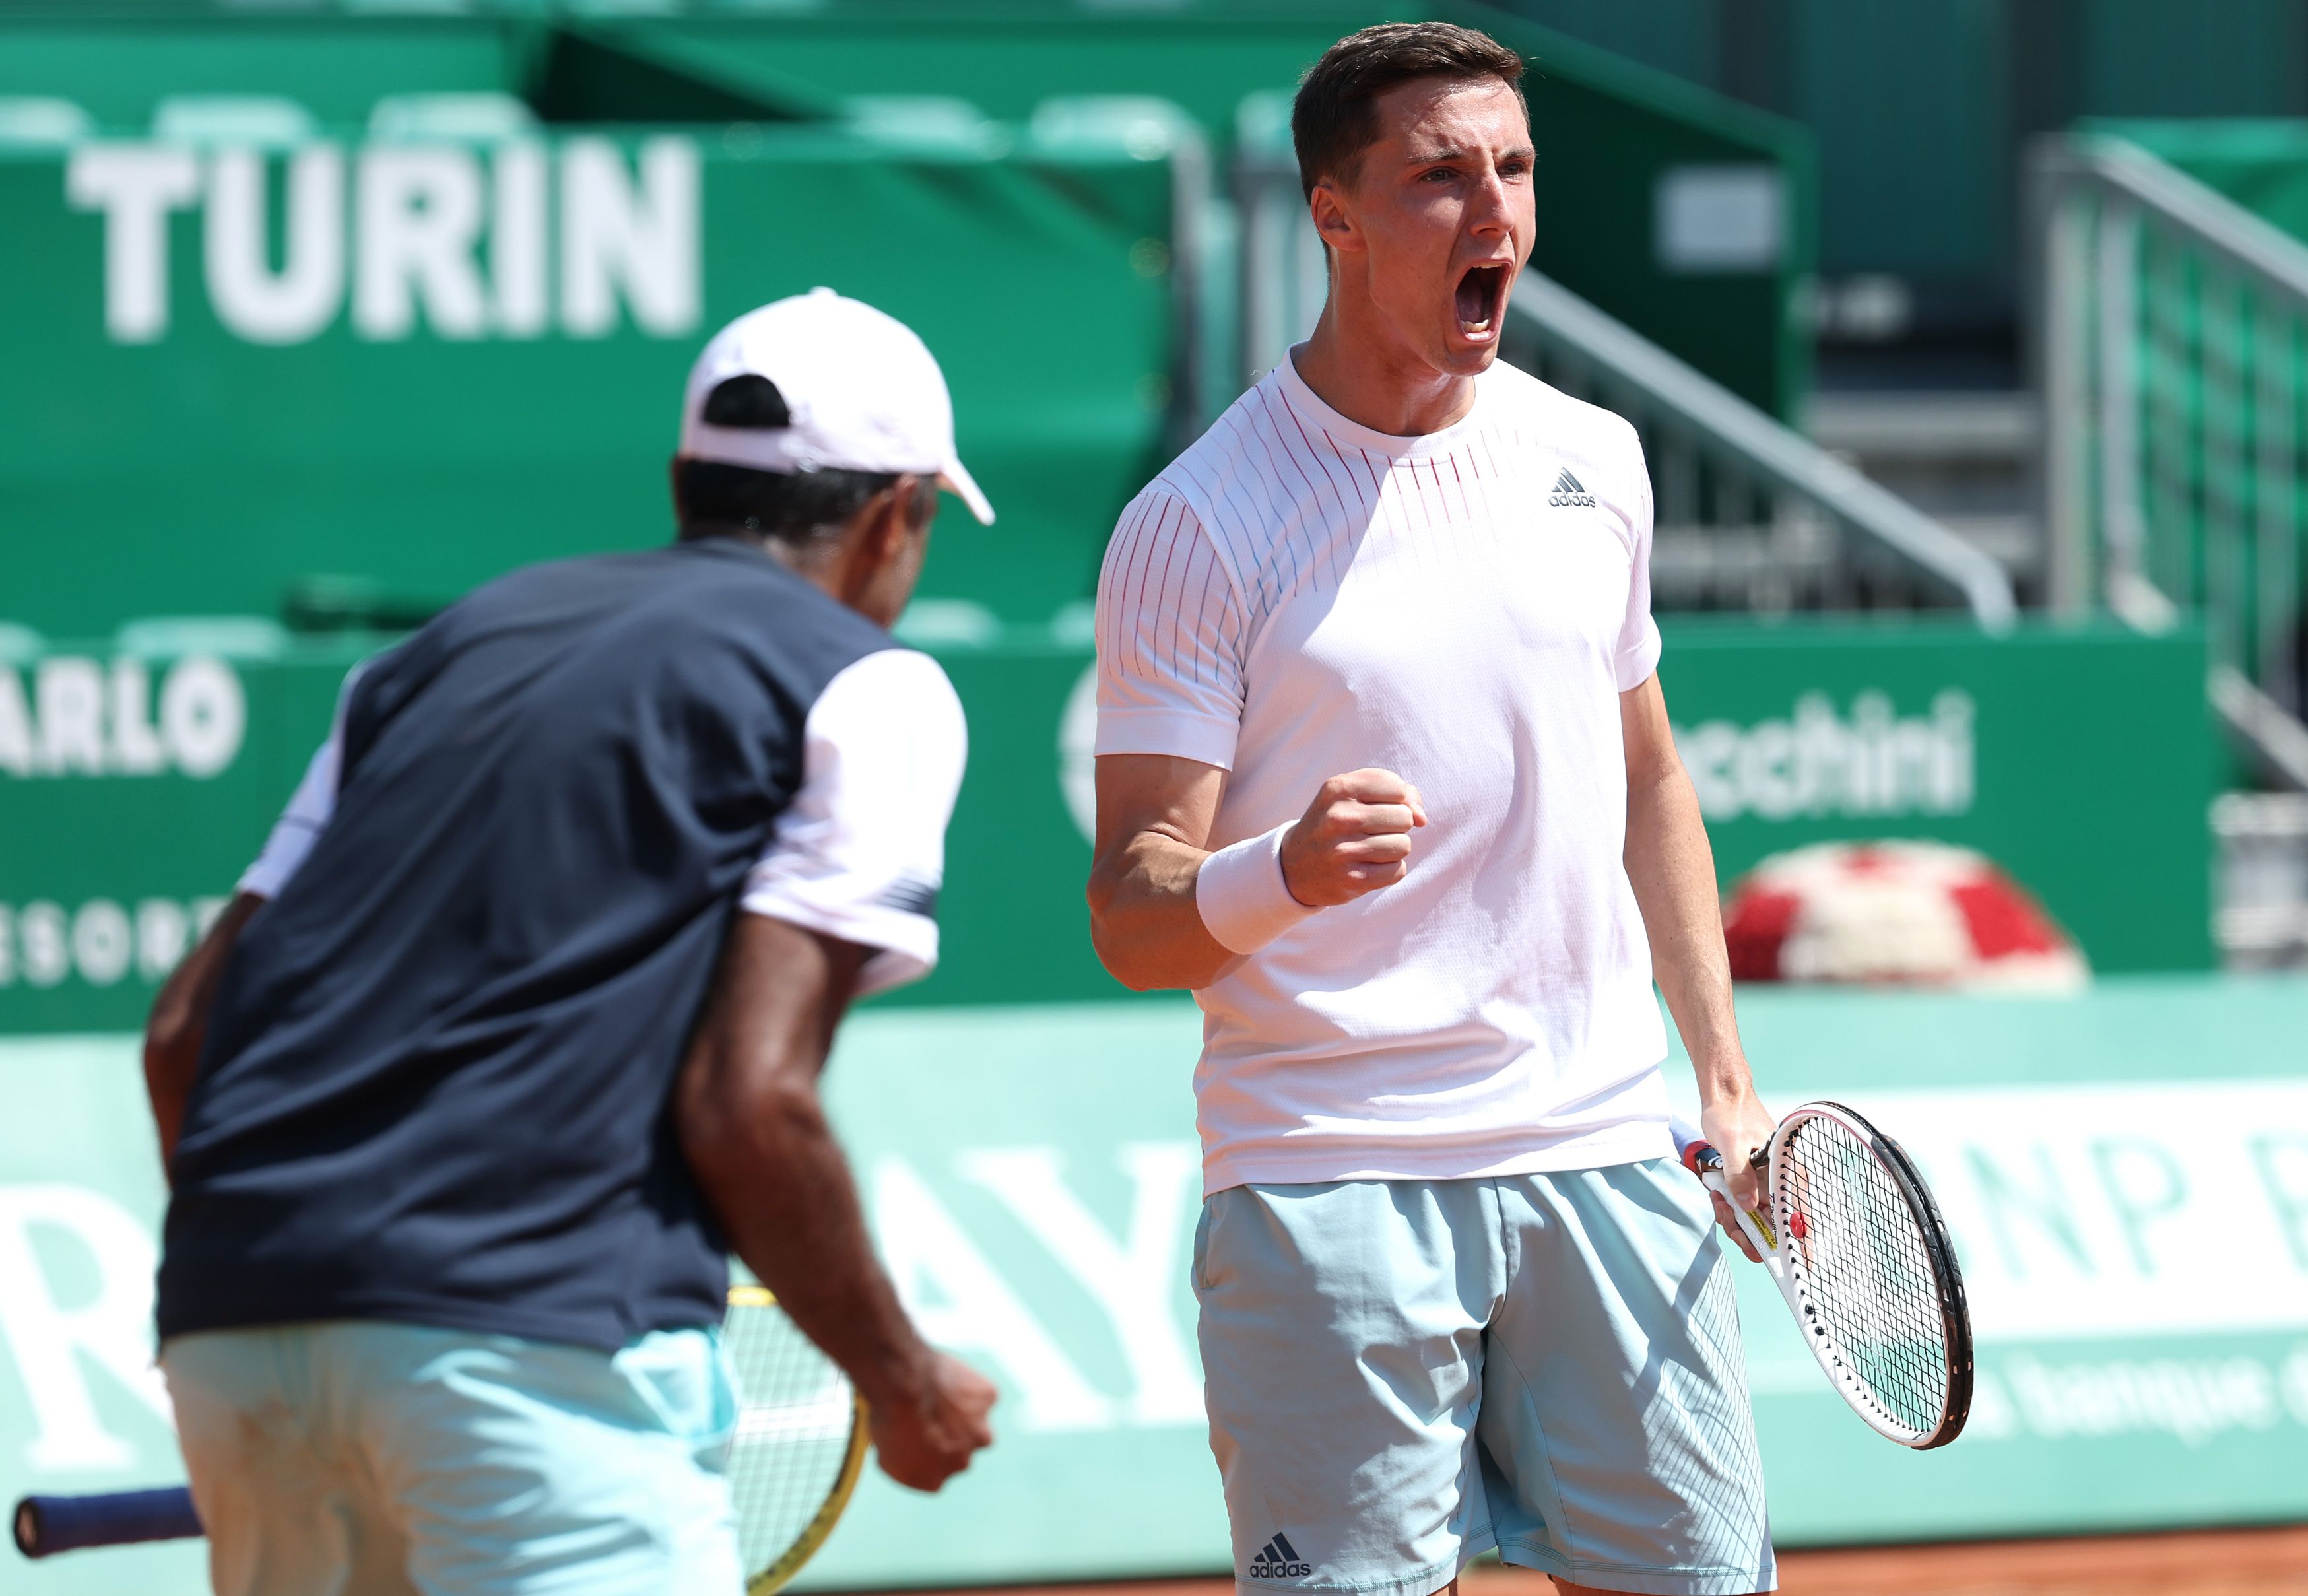 Monte-Carlo Masters 2022 Daily updates and results